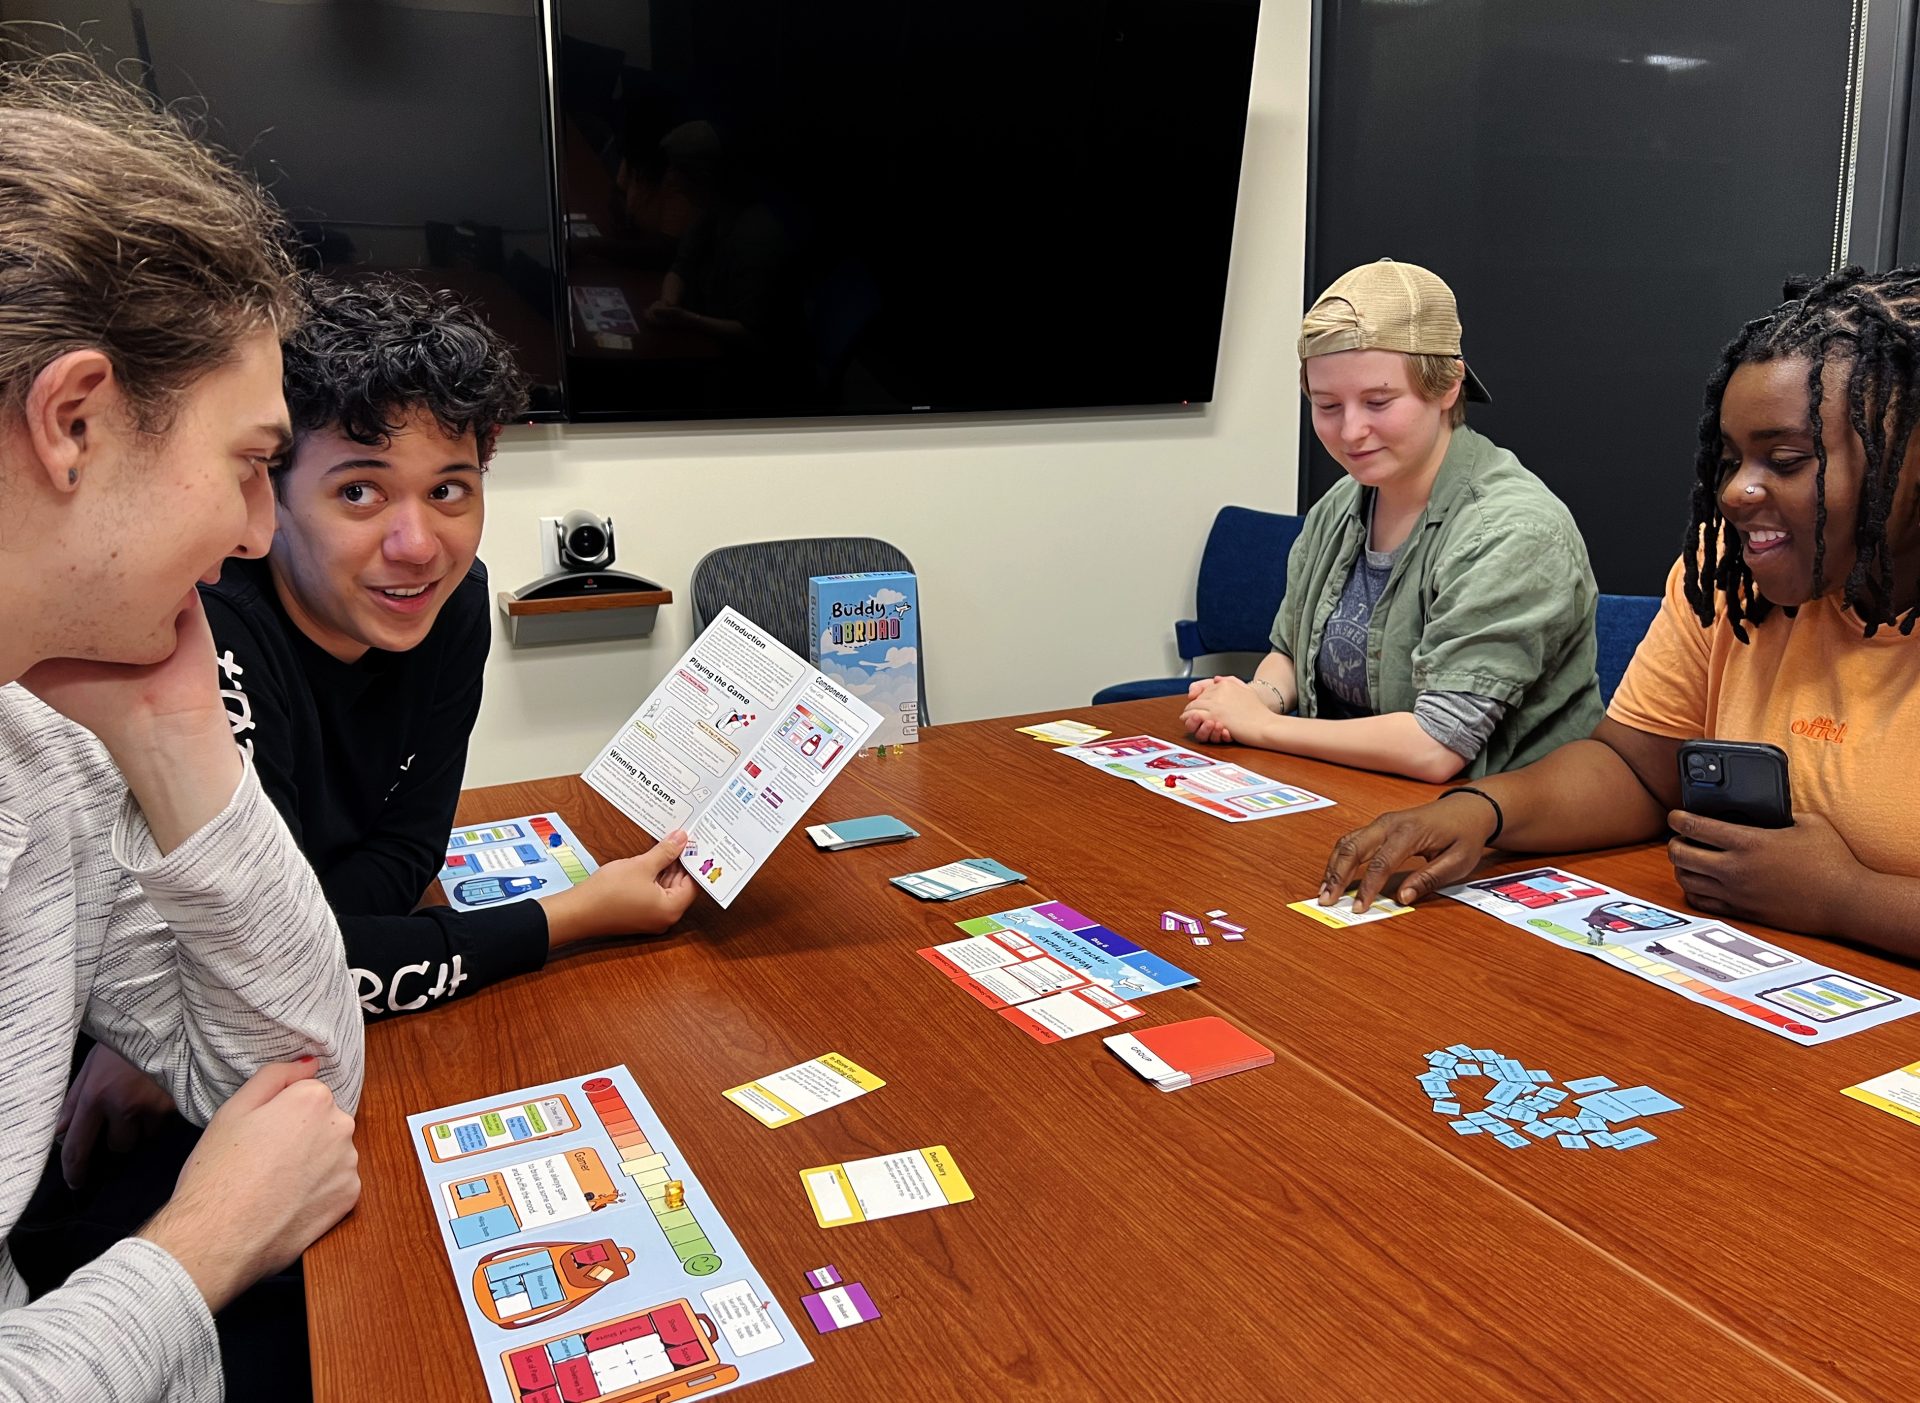 From left, Crane Benson, Silver MacAuley, Jules Mortensen and Ope Animashaun play the Buddy Abroad card game that is meant to help students acclimate to studying abroad.